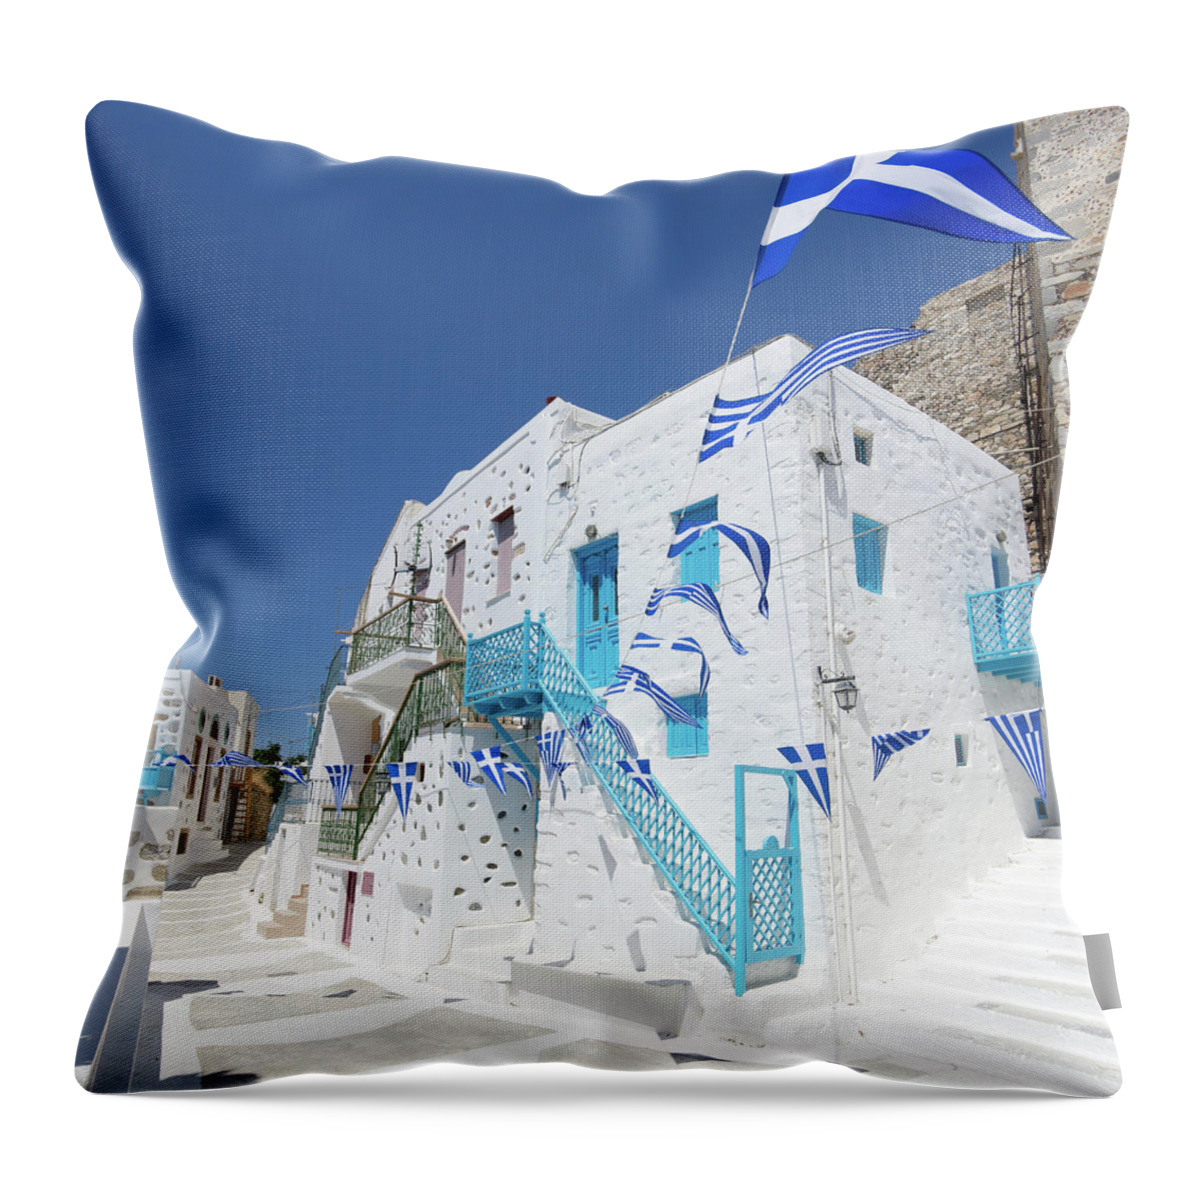 Greek Culture Throw Pillow featuring the photograph Greek Pennant Flags Waving In Breeze On by Abzee